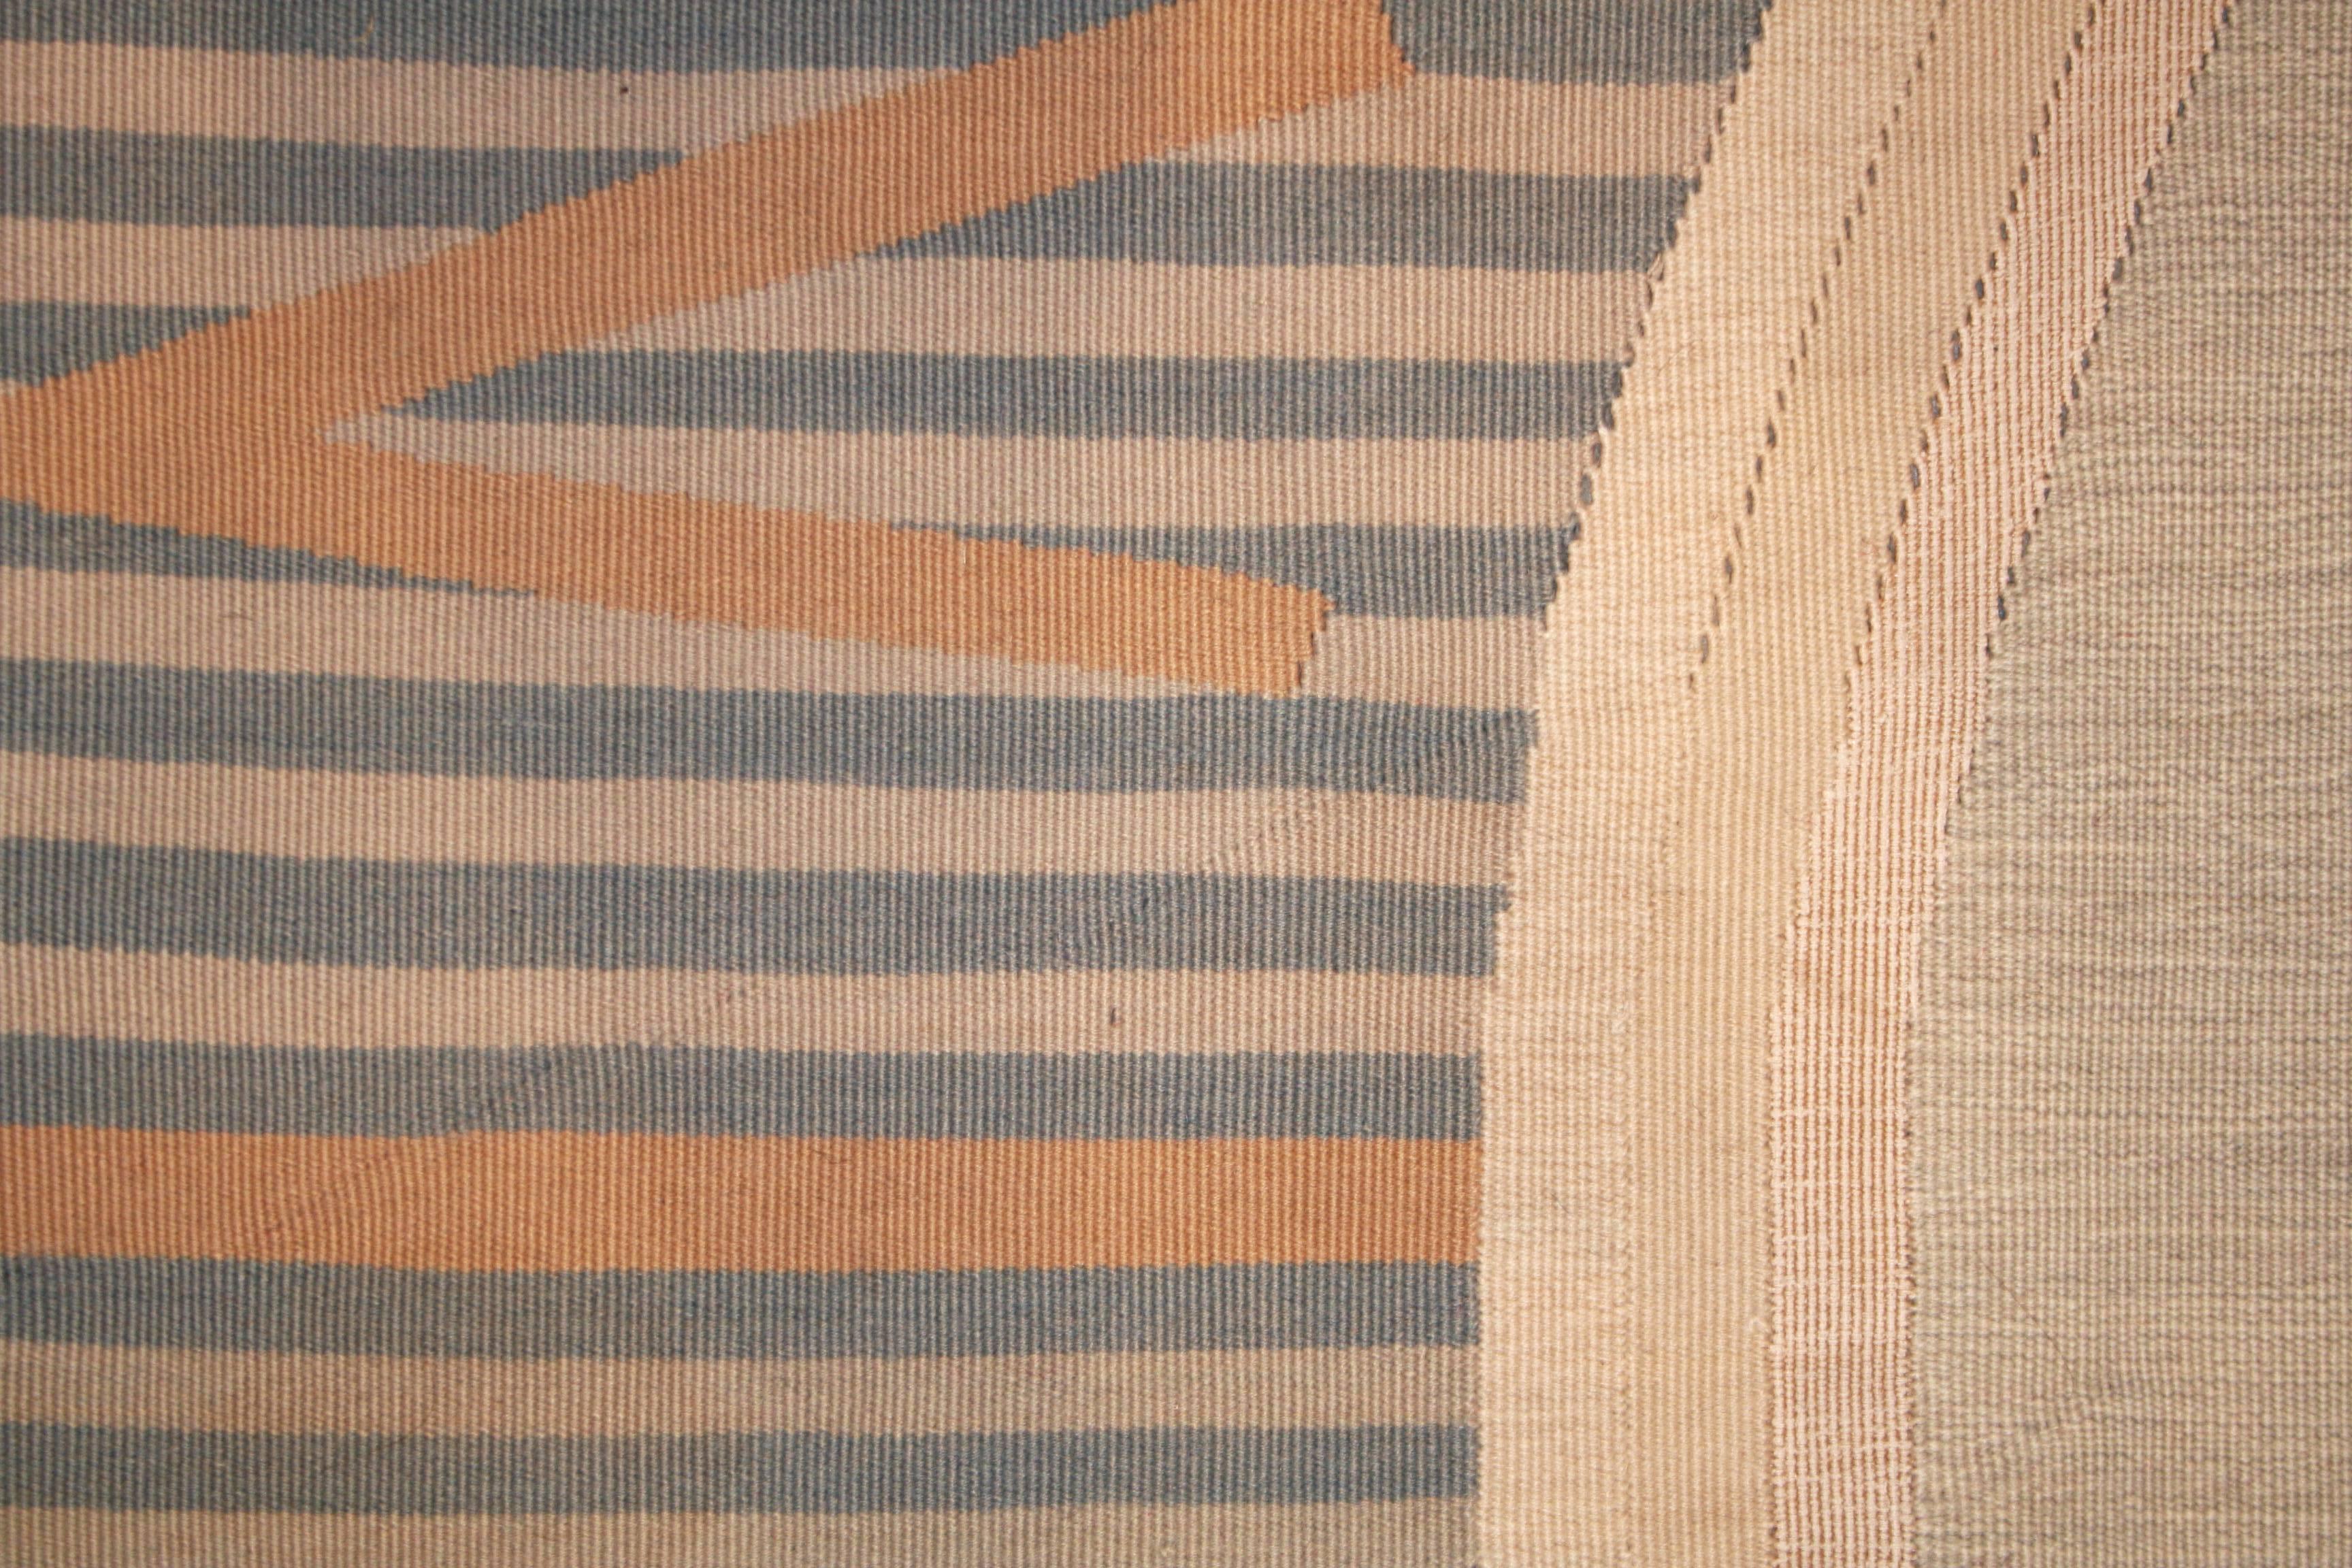 The quest for innovation that characterized the early years of the Art Deco period can be seen in much of the textile art of that era. D.I.M. (Décoration Intérieure Moderne) was a leading Parisian interior design firm, owned by two of the most